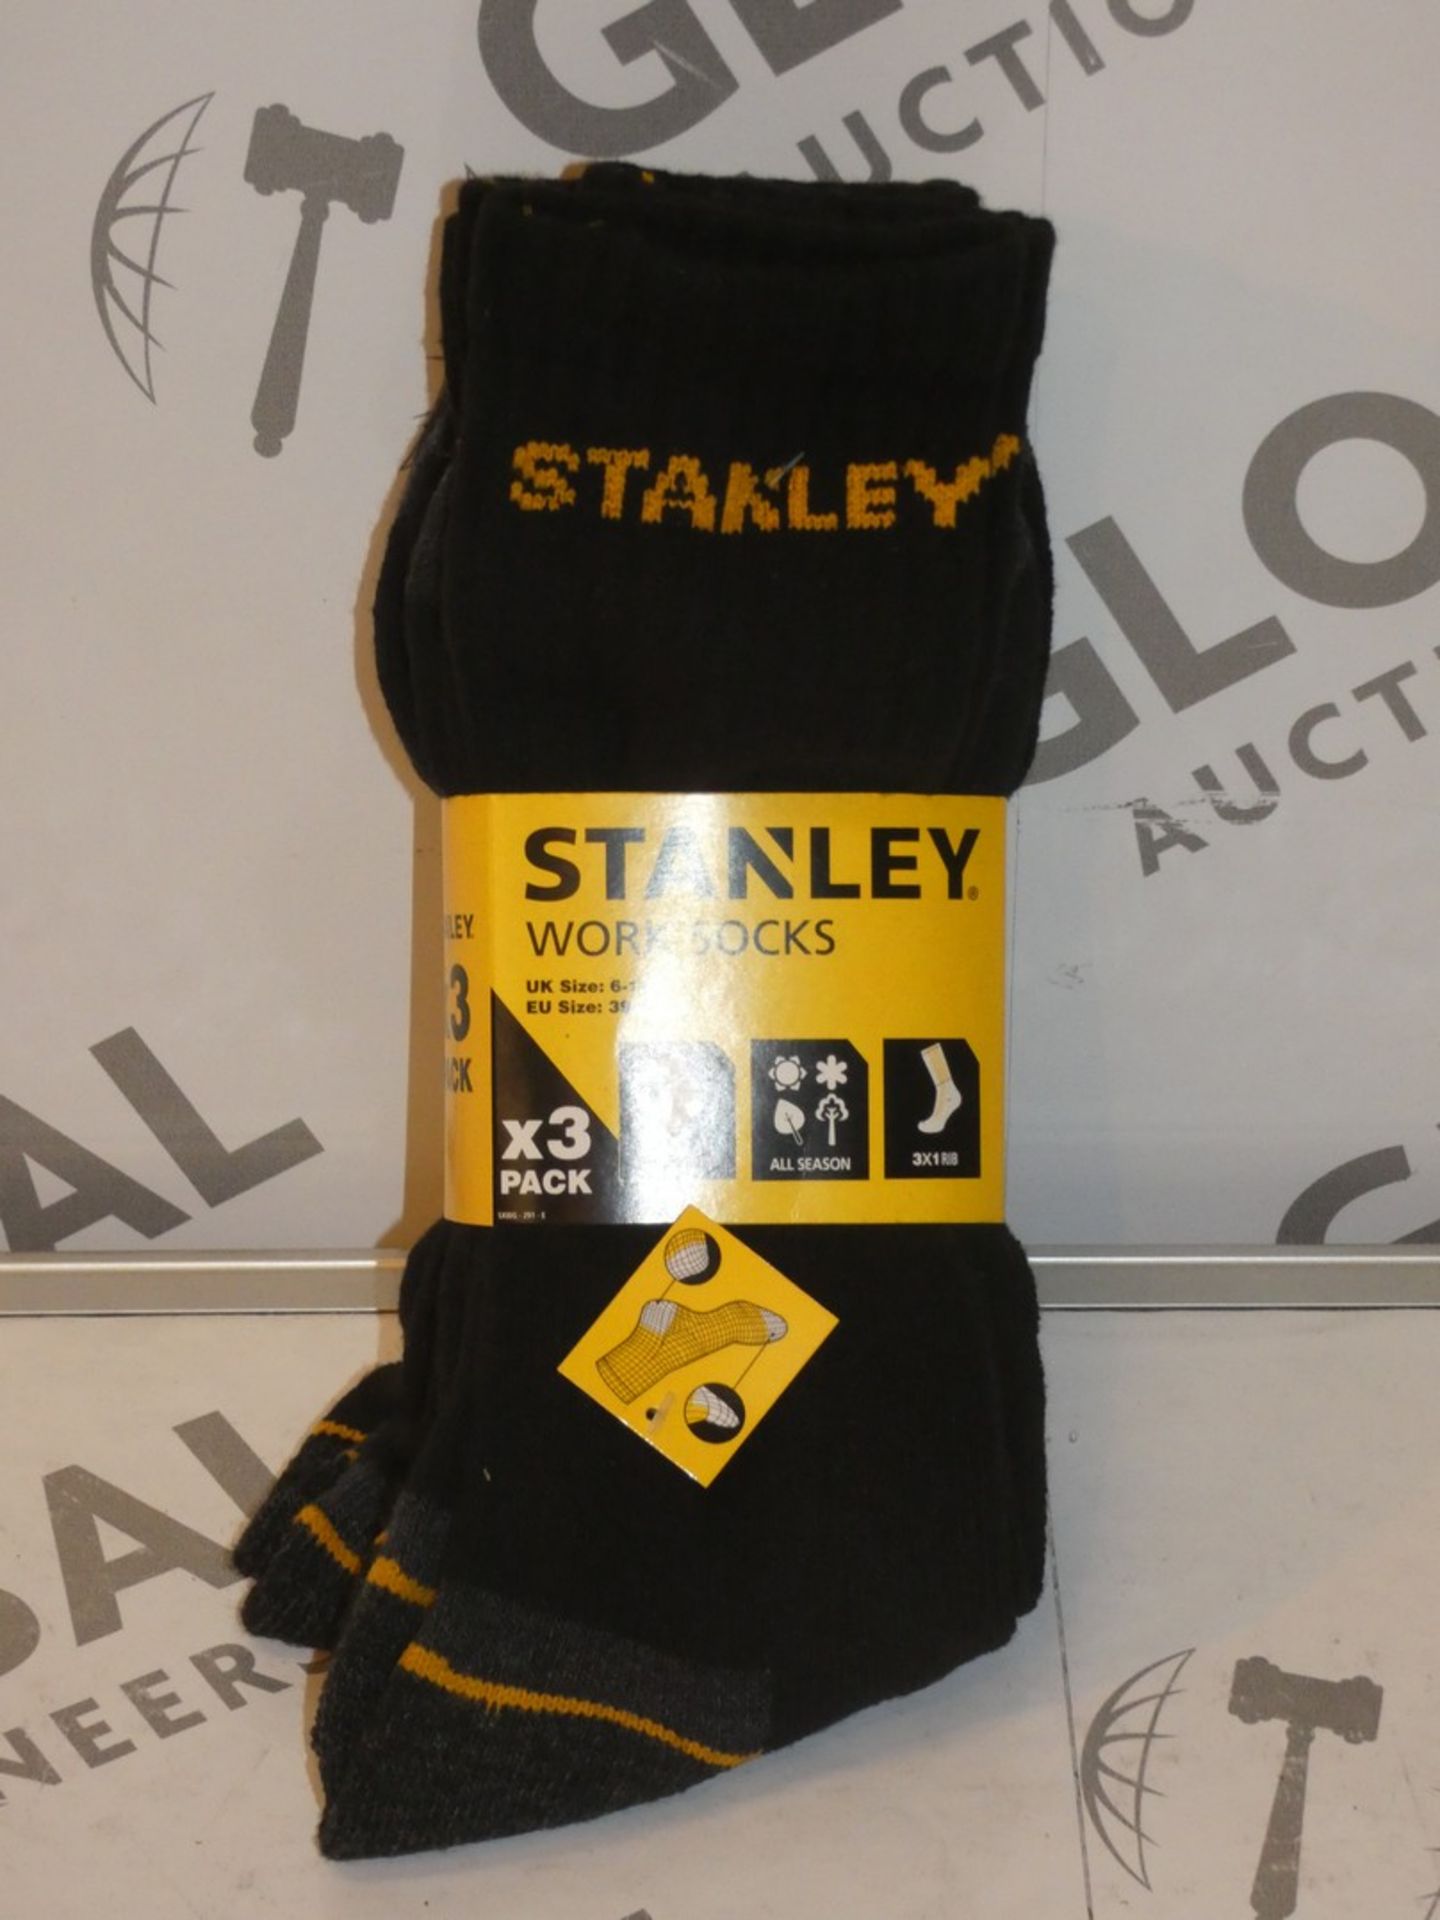 Lot to Contain 10 Packs of 3 Brand New Stanley Work Socks RRP £5.99 Per Pack